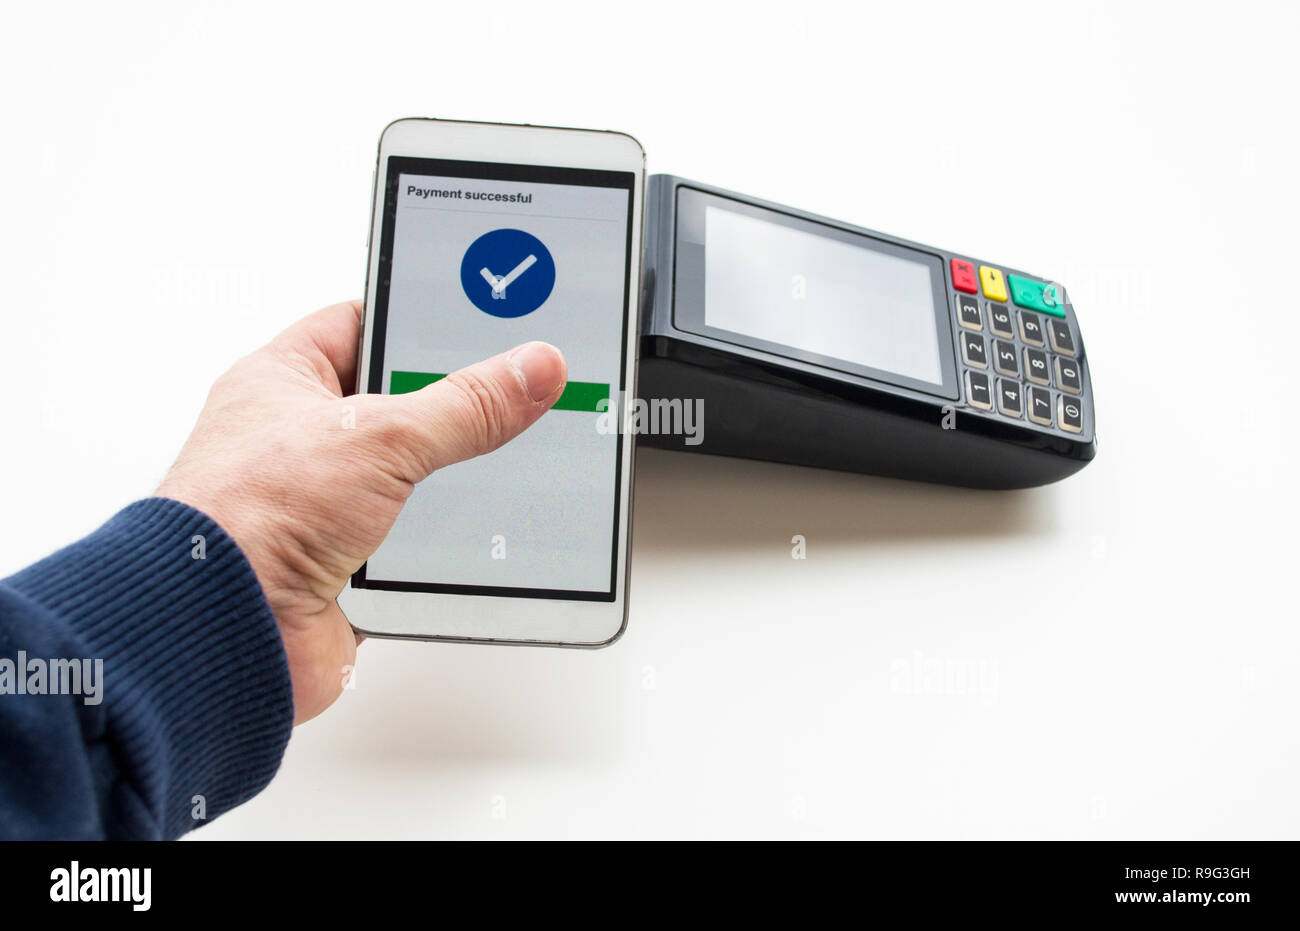 Contactless payment with smart phone - Nfc technology Stock Photo